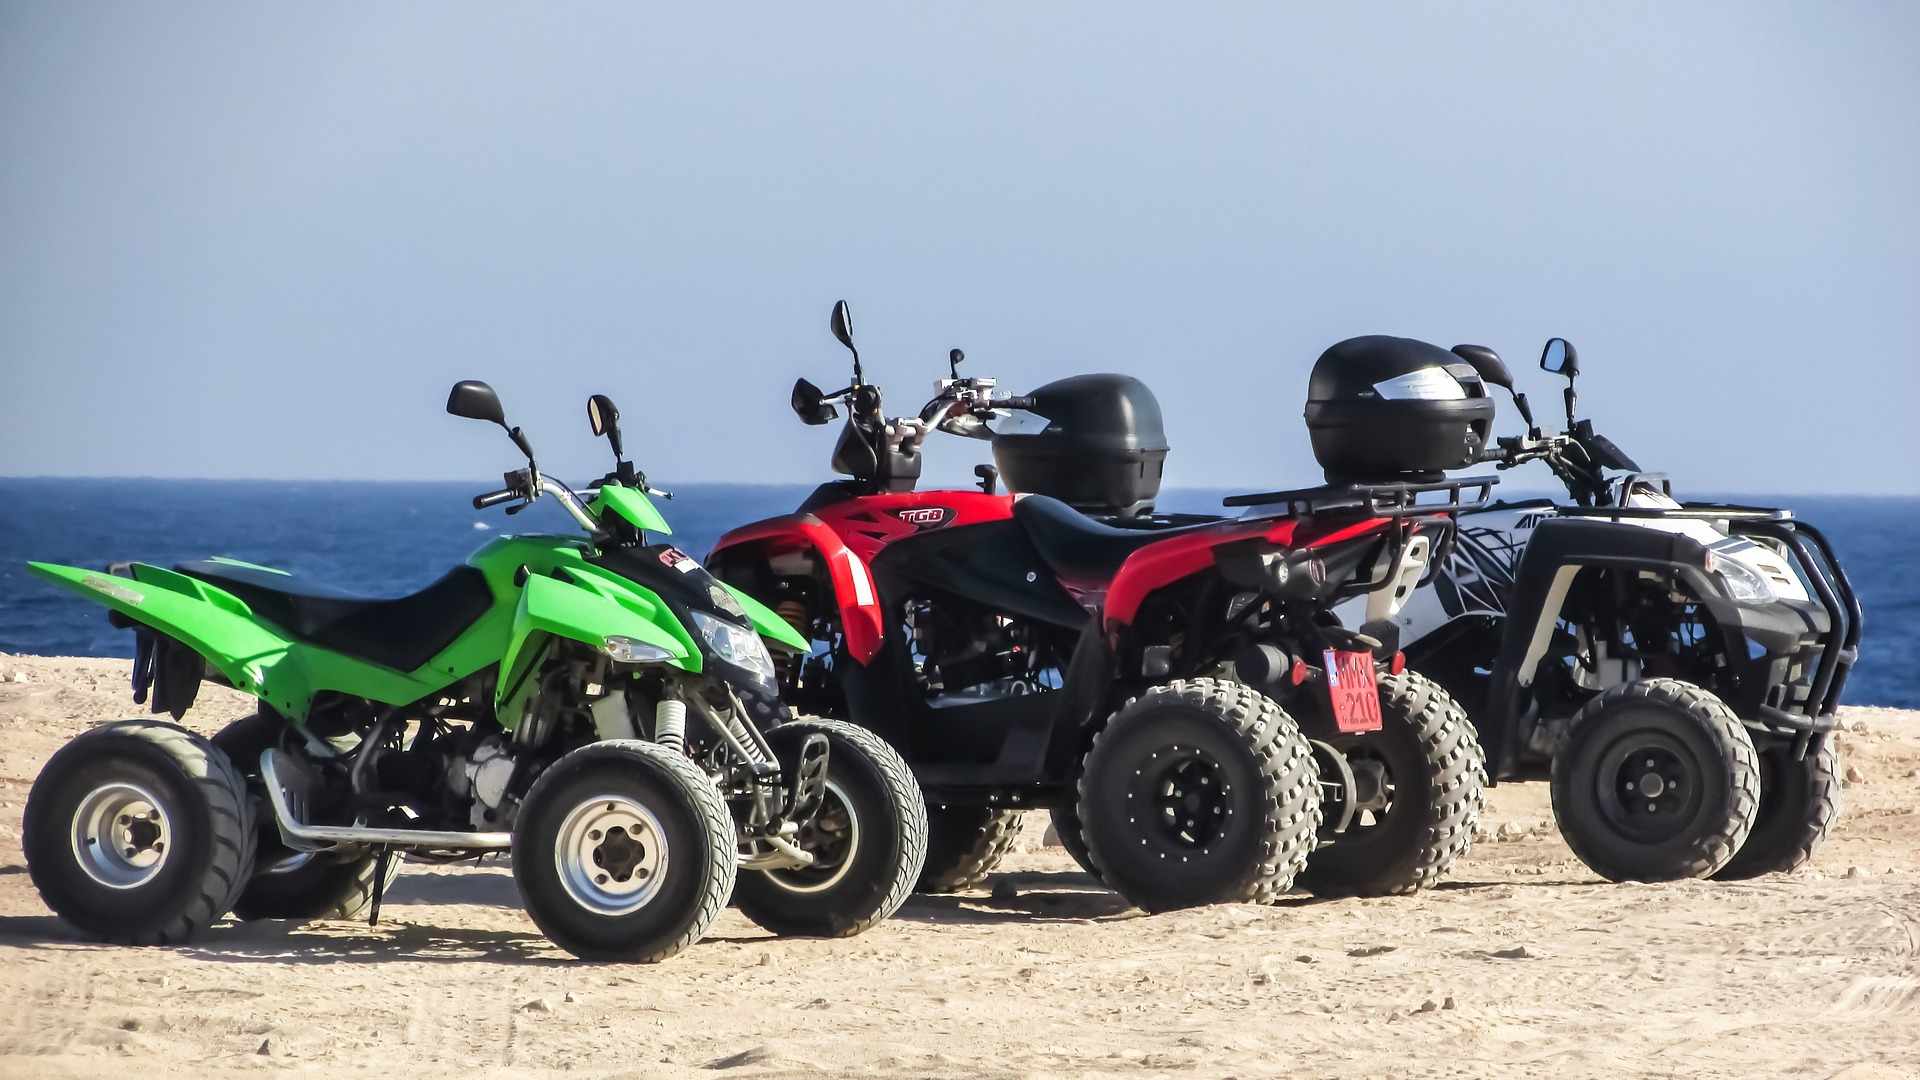 Interview with The Golden Ride Rentals manager in Pafos